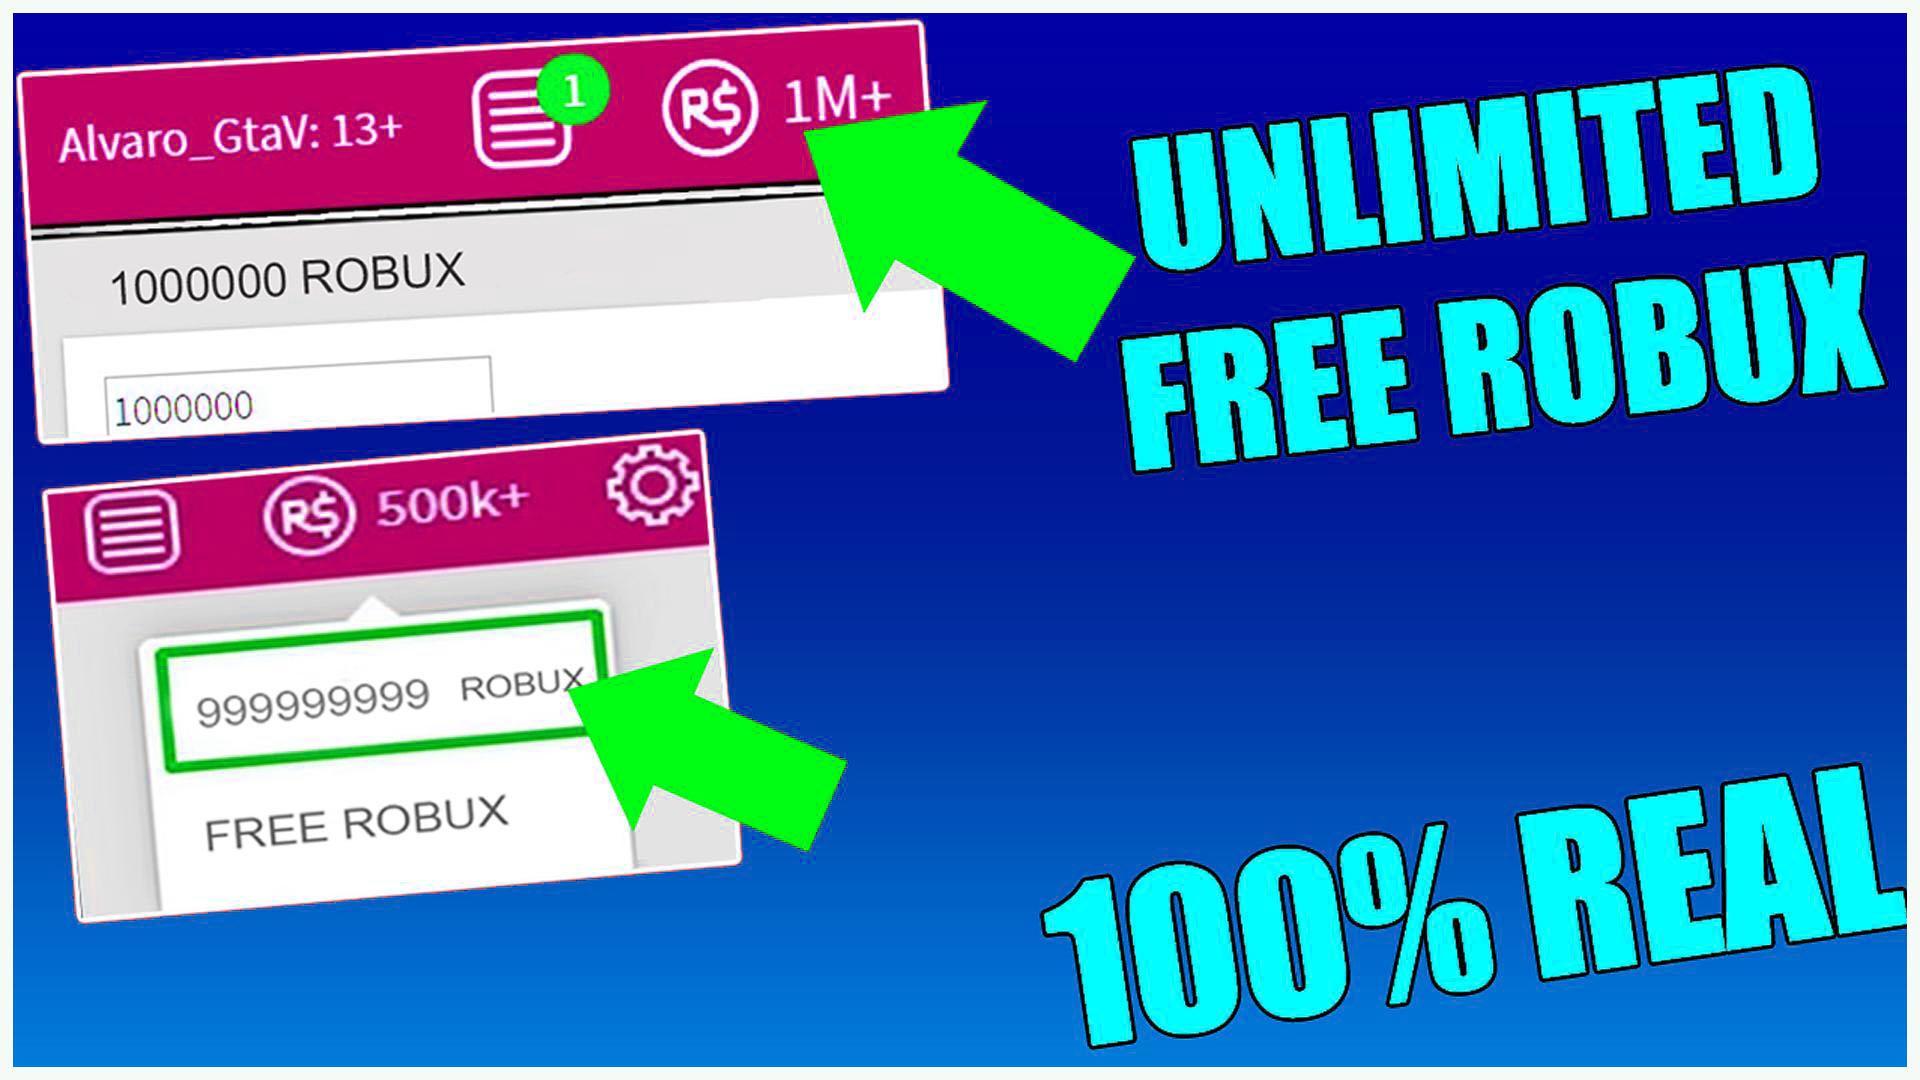 Free Robux New Tips 2020 For Android Apk Download - new free robux guide and tips for android download